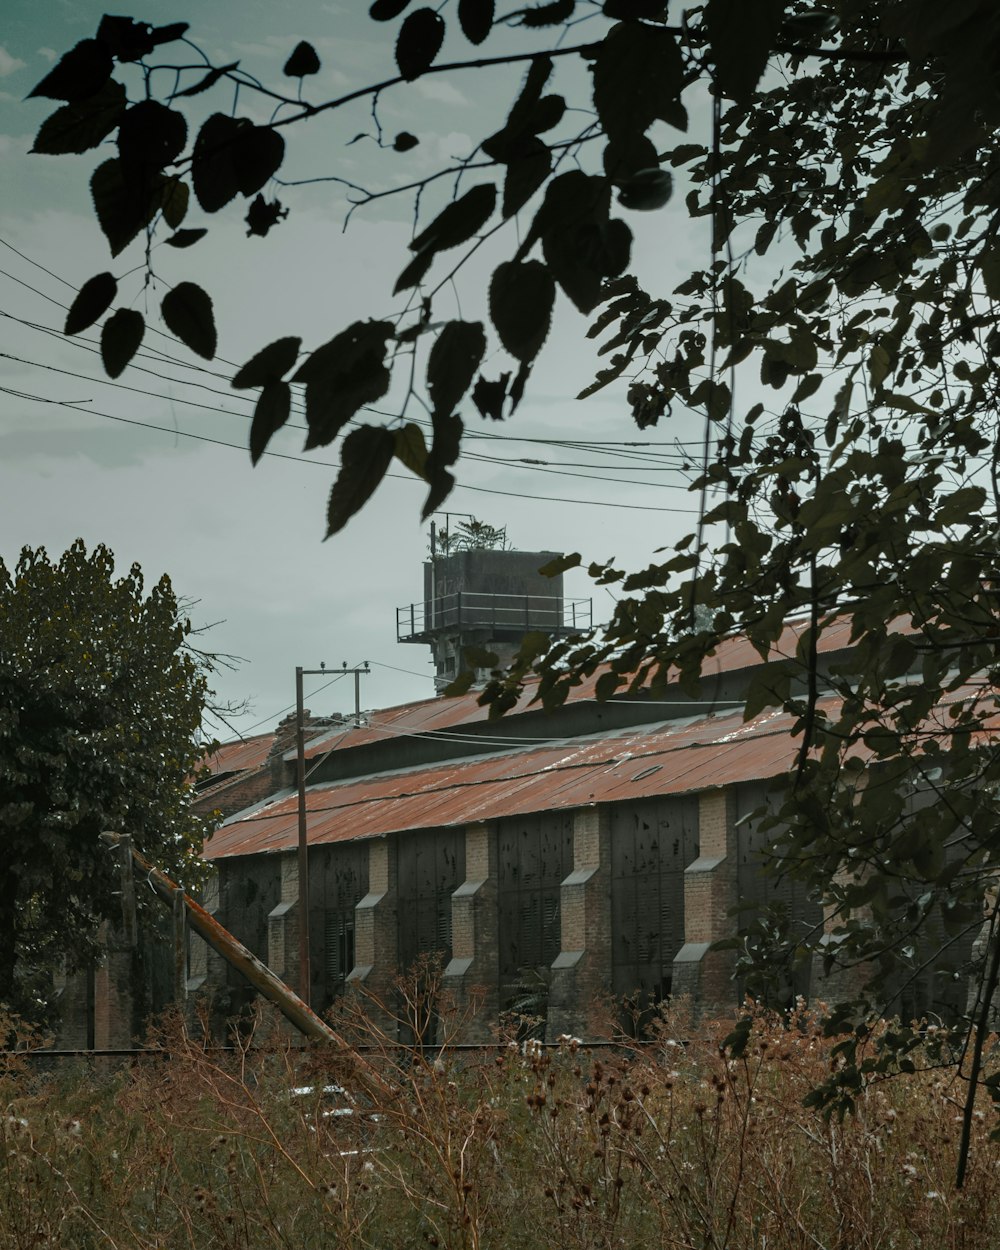 an old factory building with a clock tower in the background